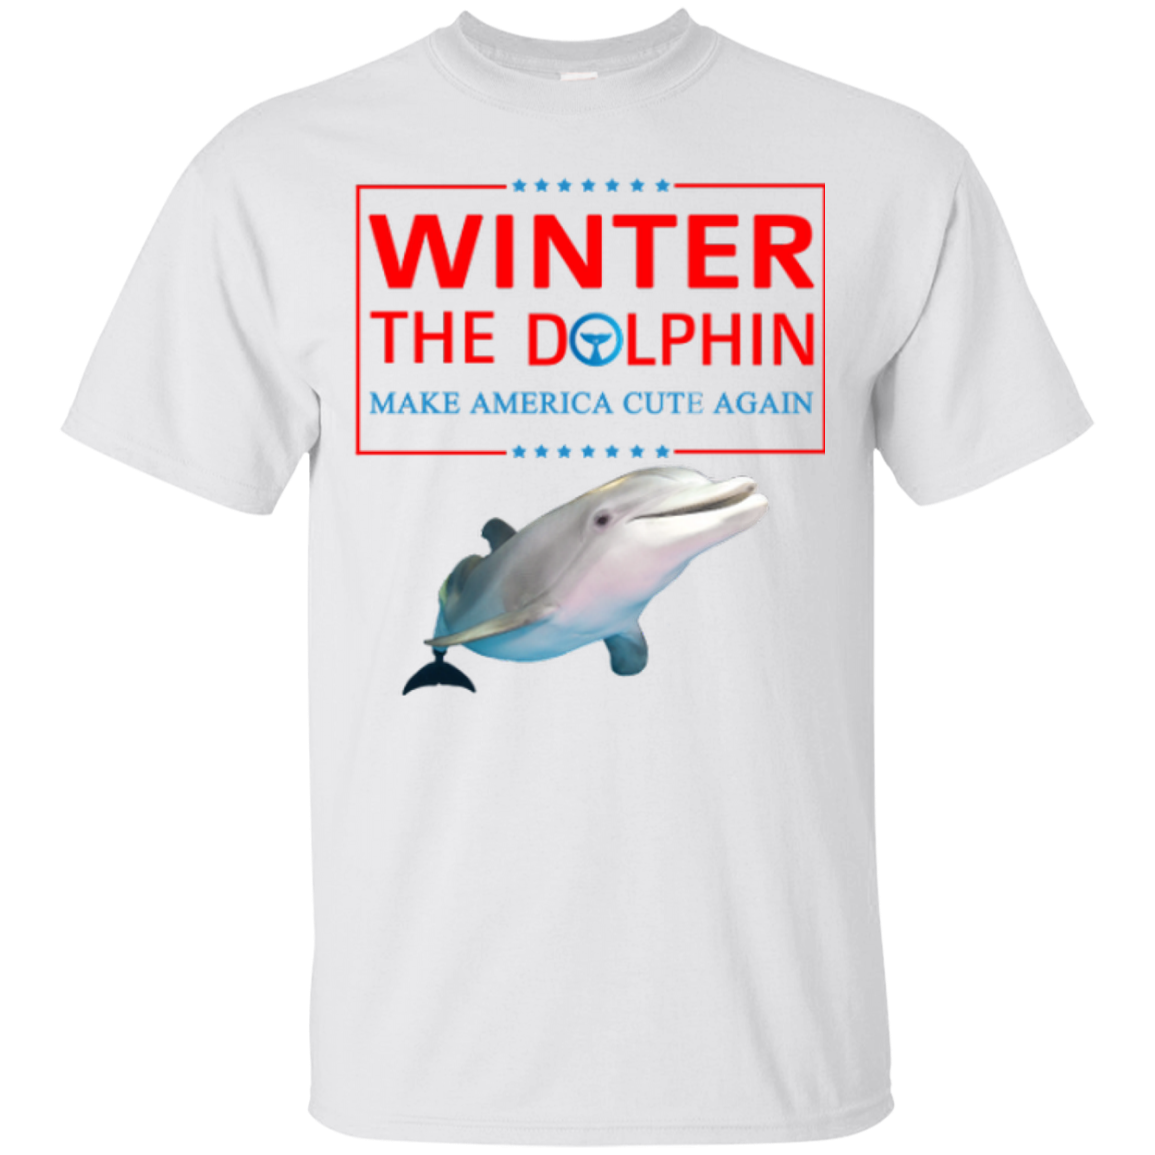 Winter the Dolphin for president shirts, hoodies